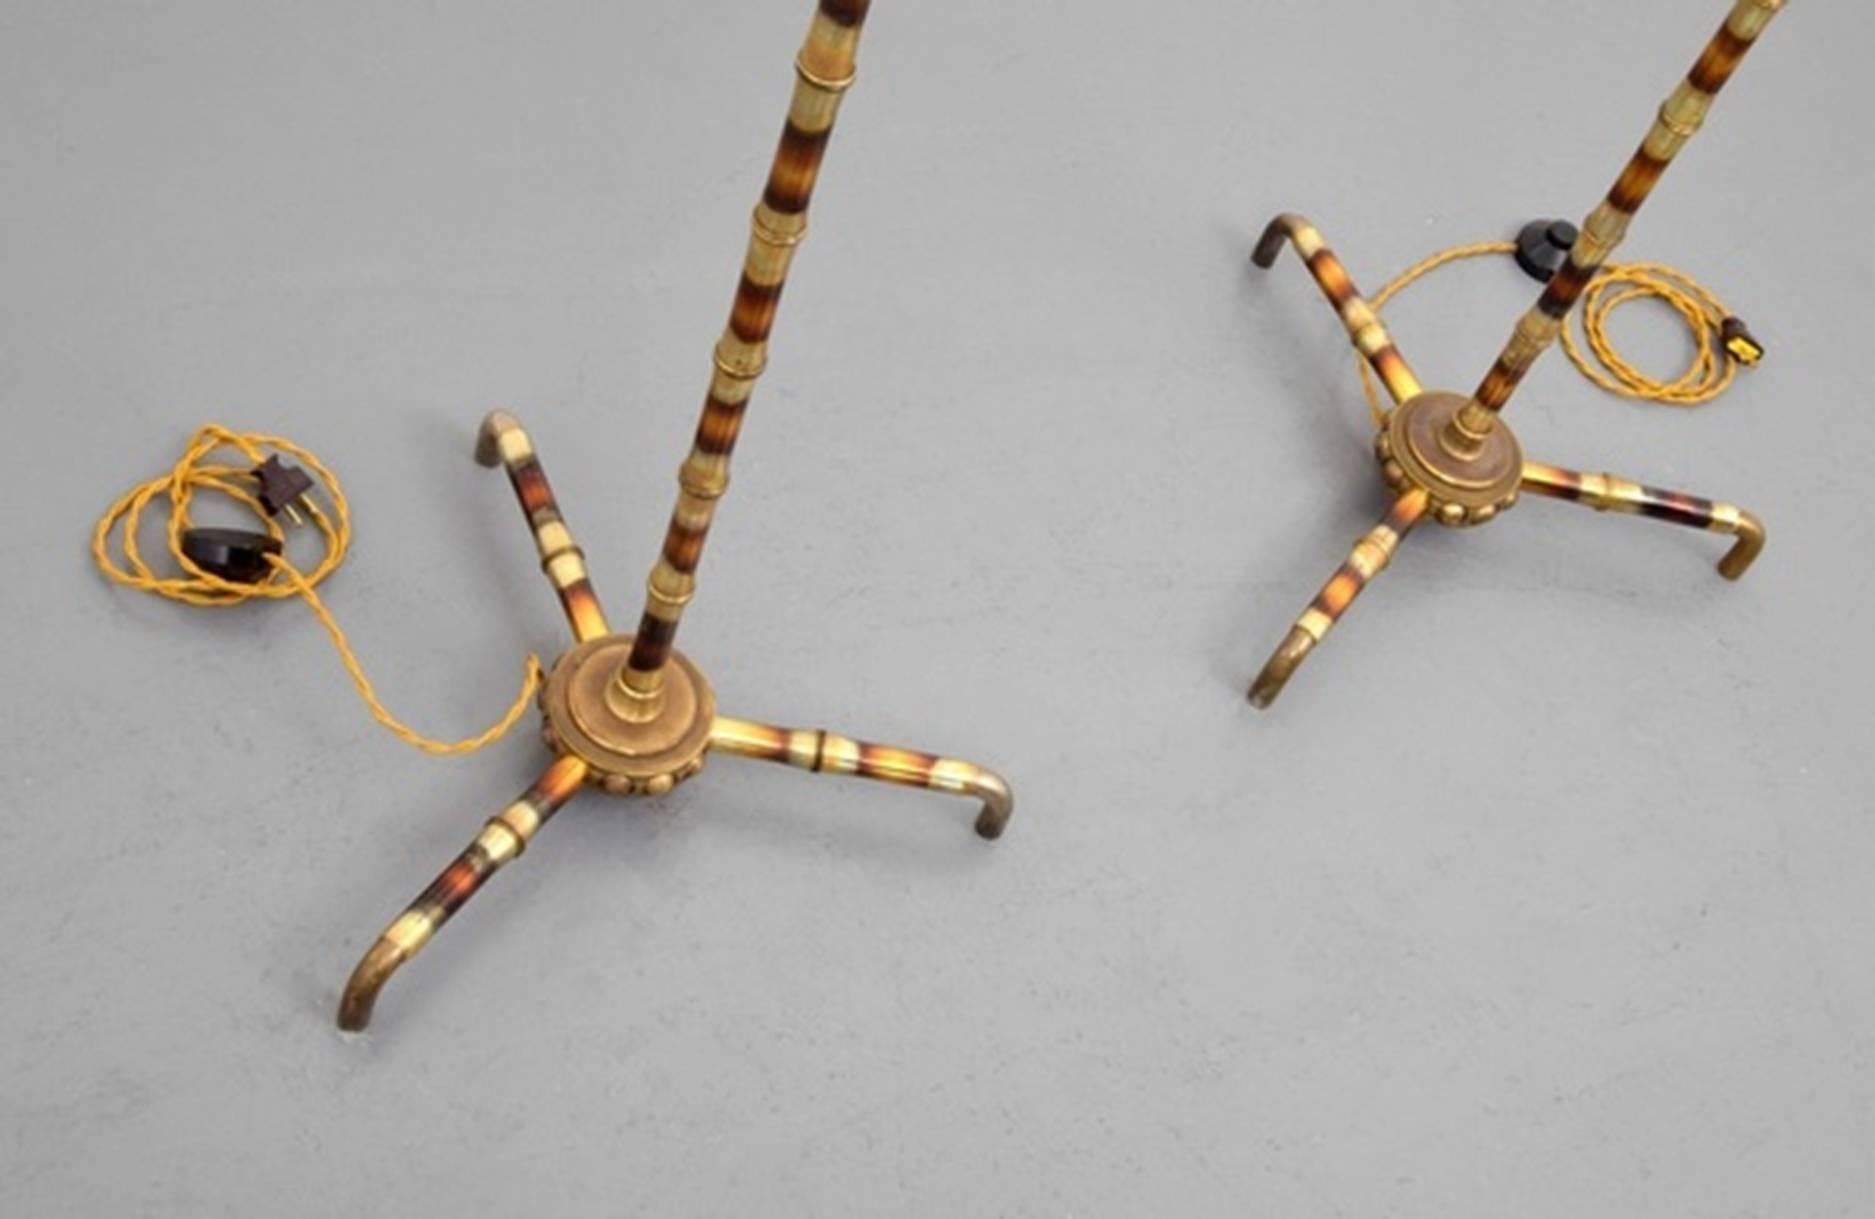 A rare pair of French floor lamps manufactured in the 1950s attributed to Maison Baguès. The lamps have a unique brass finish resembling faux bamboo, and an interesting leg design.

